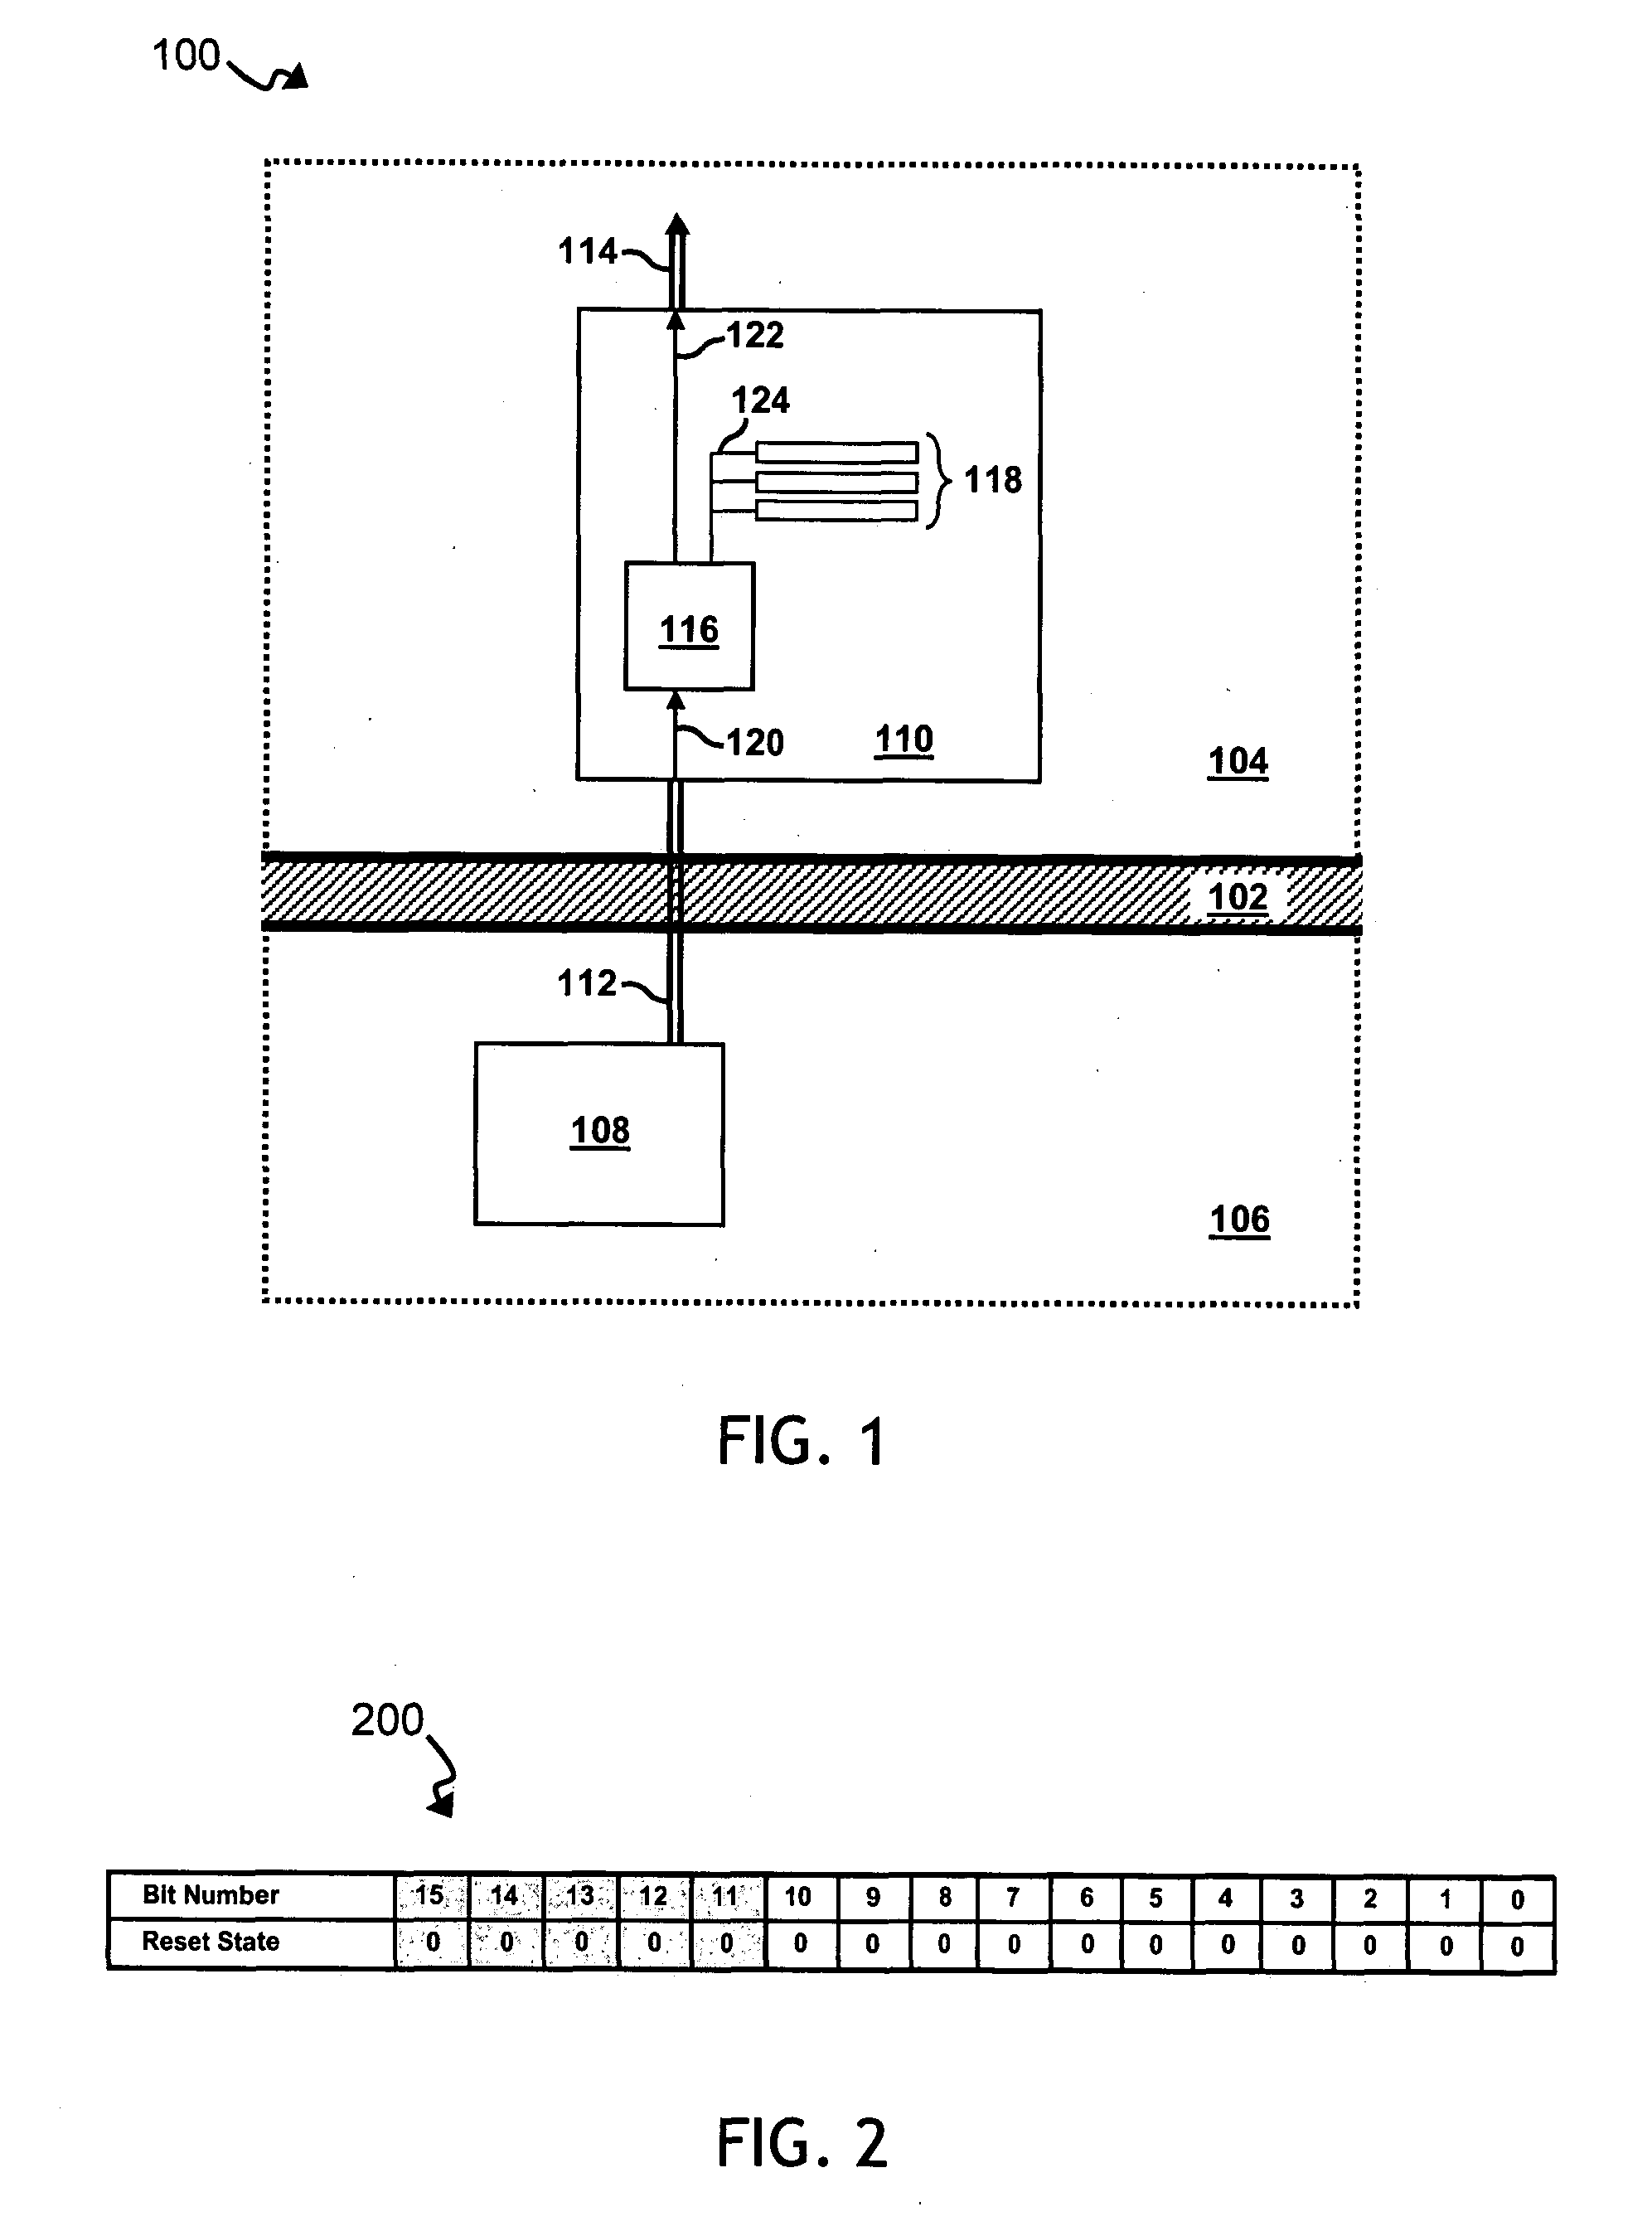 System for signaling serialized interrupts using message signaled interrupts